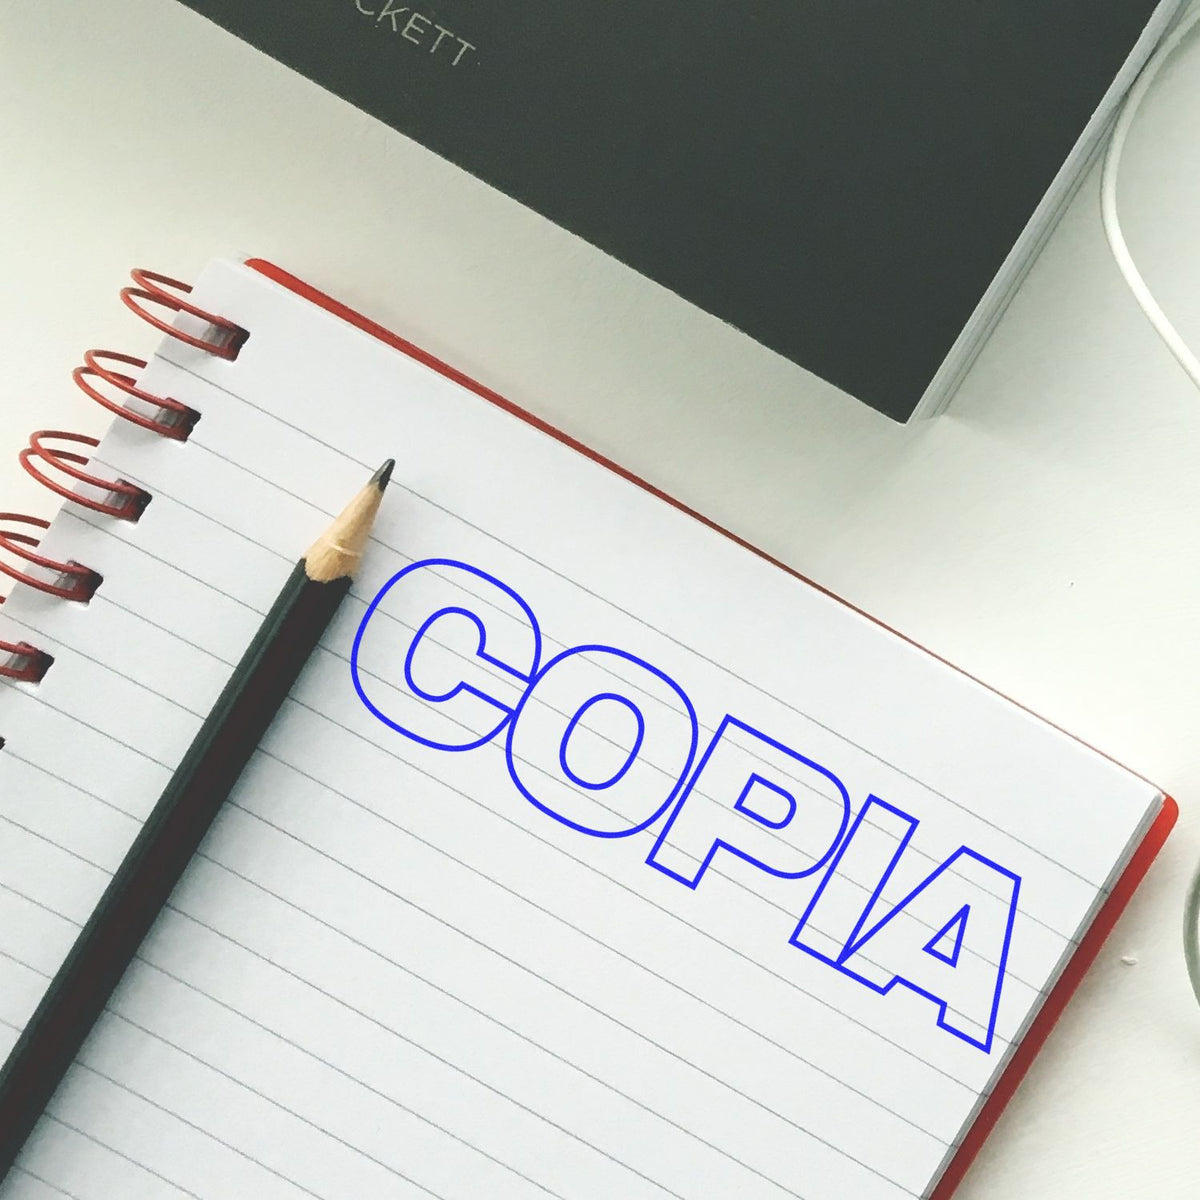 Large Self-Inking Copia Stamp In Use Photo